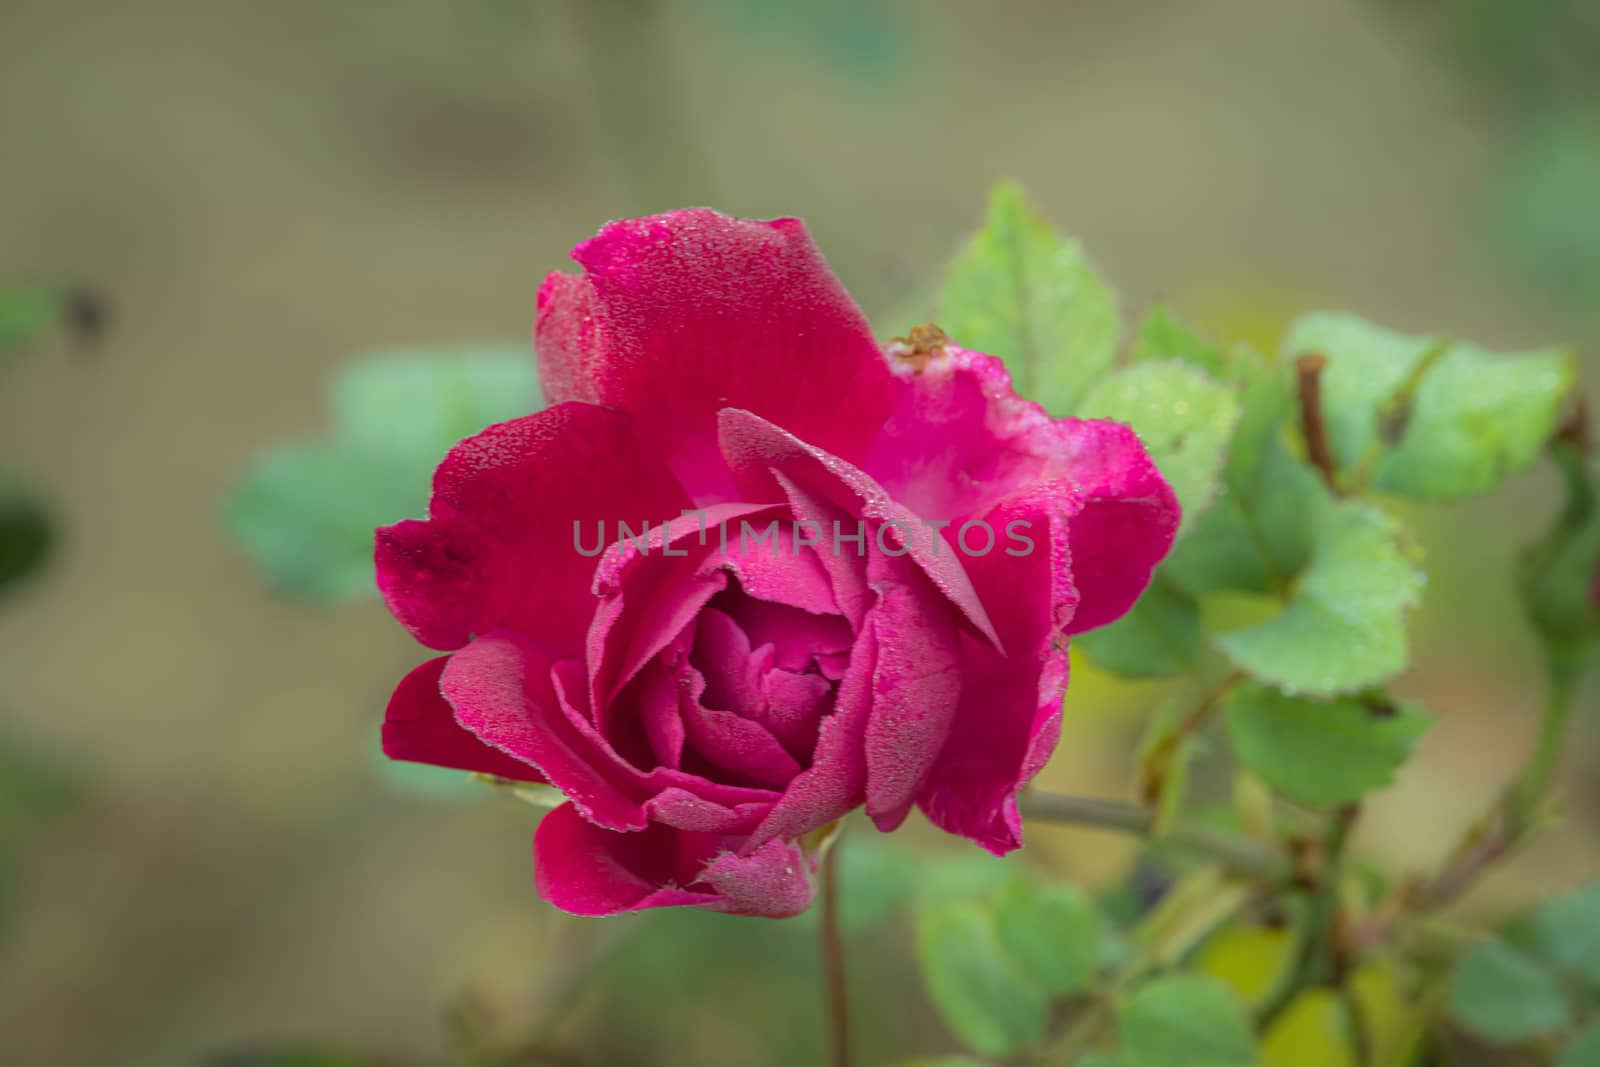 During winter, the pink rose flower blossomed with dew and vintage background